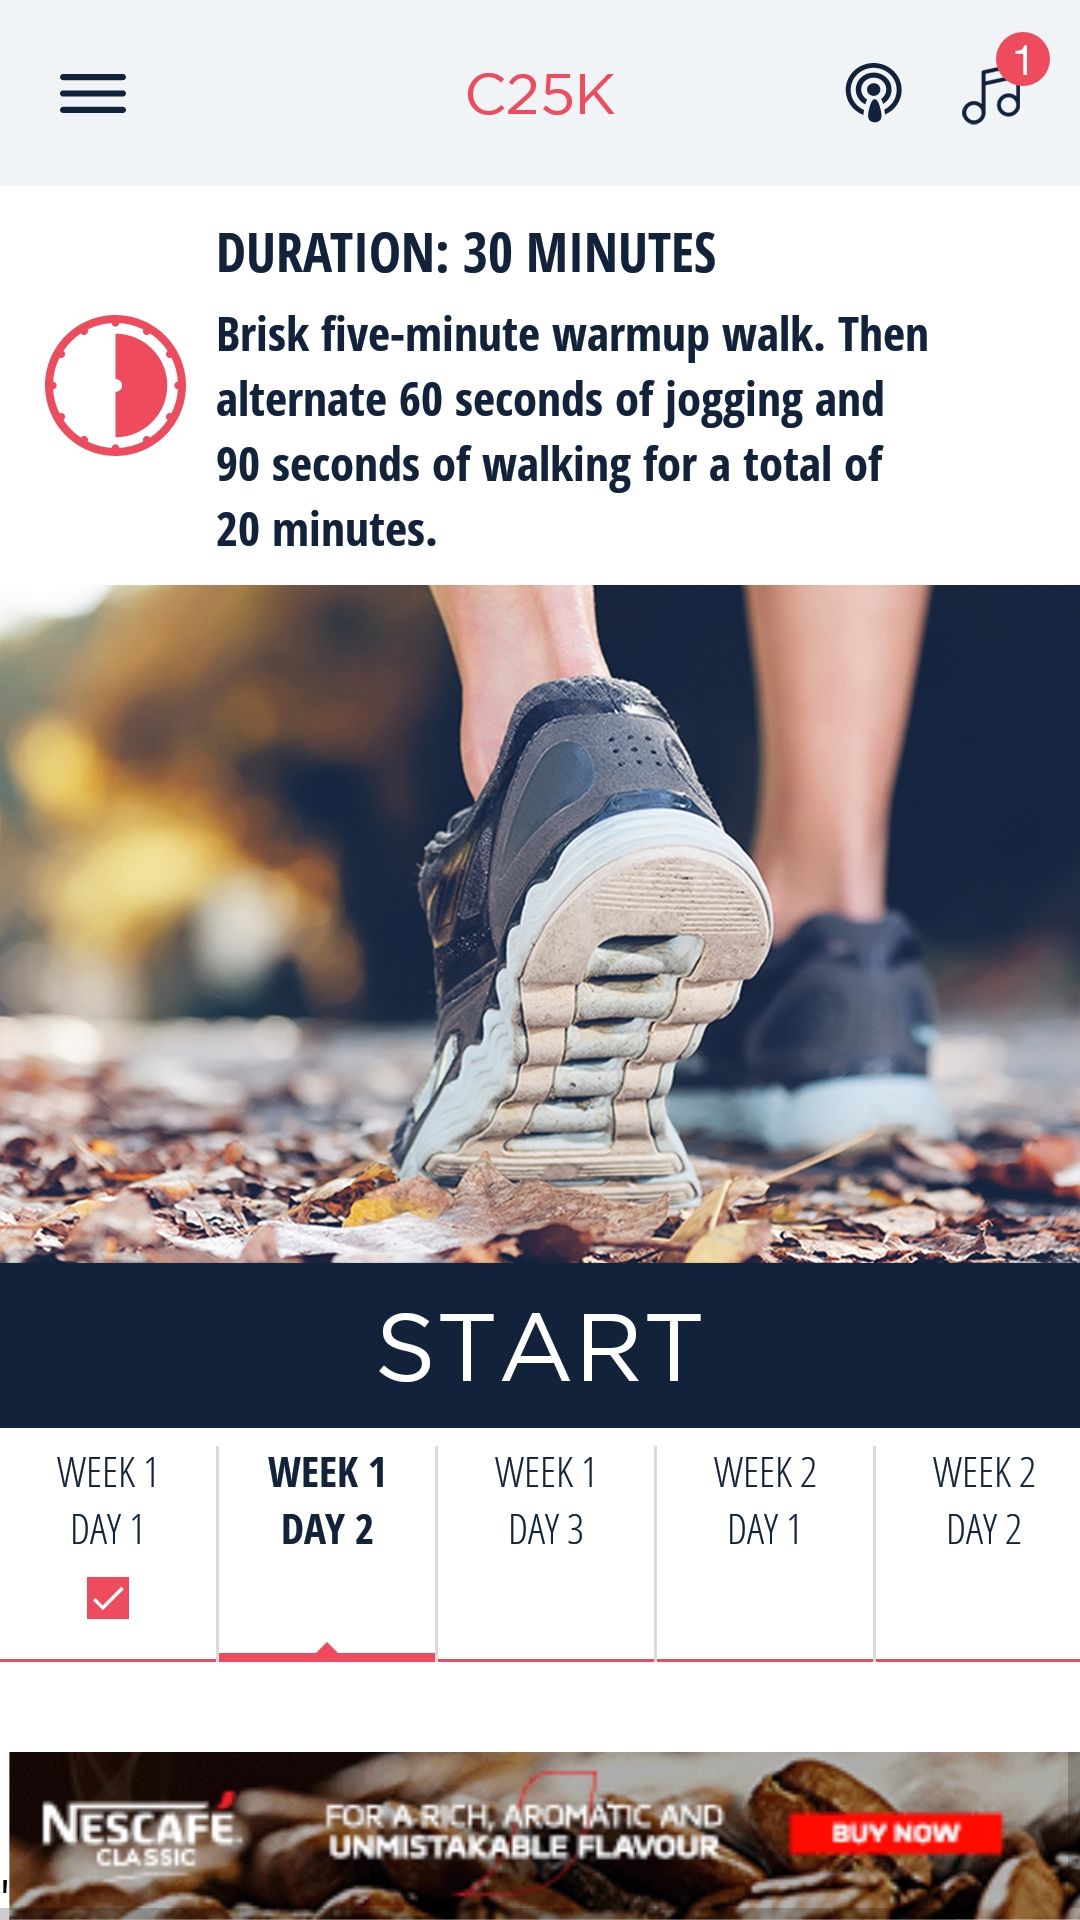 C25K mobile couch to 5K training app week 1